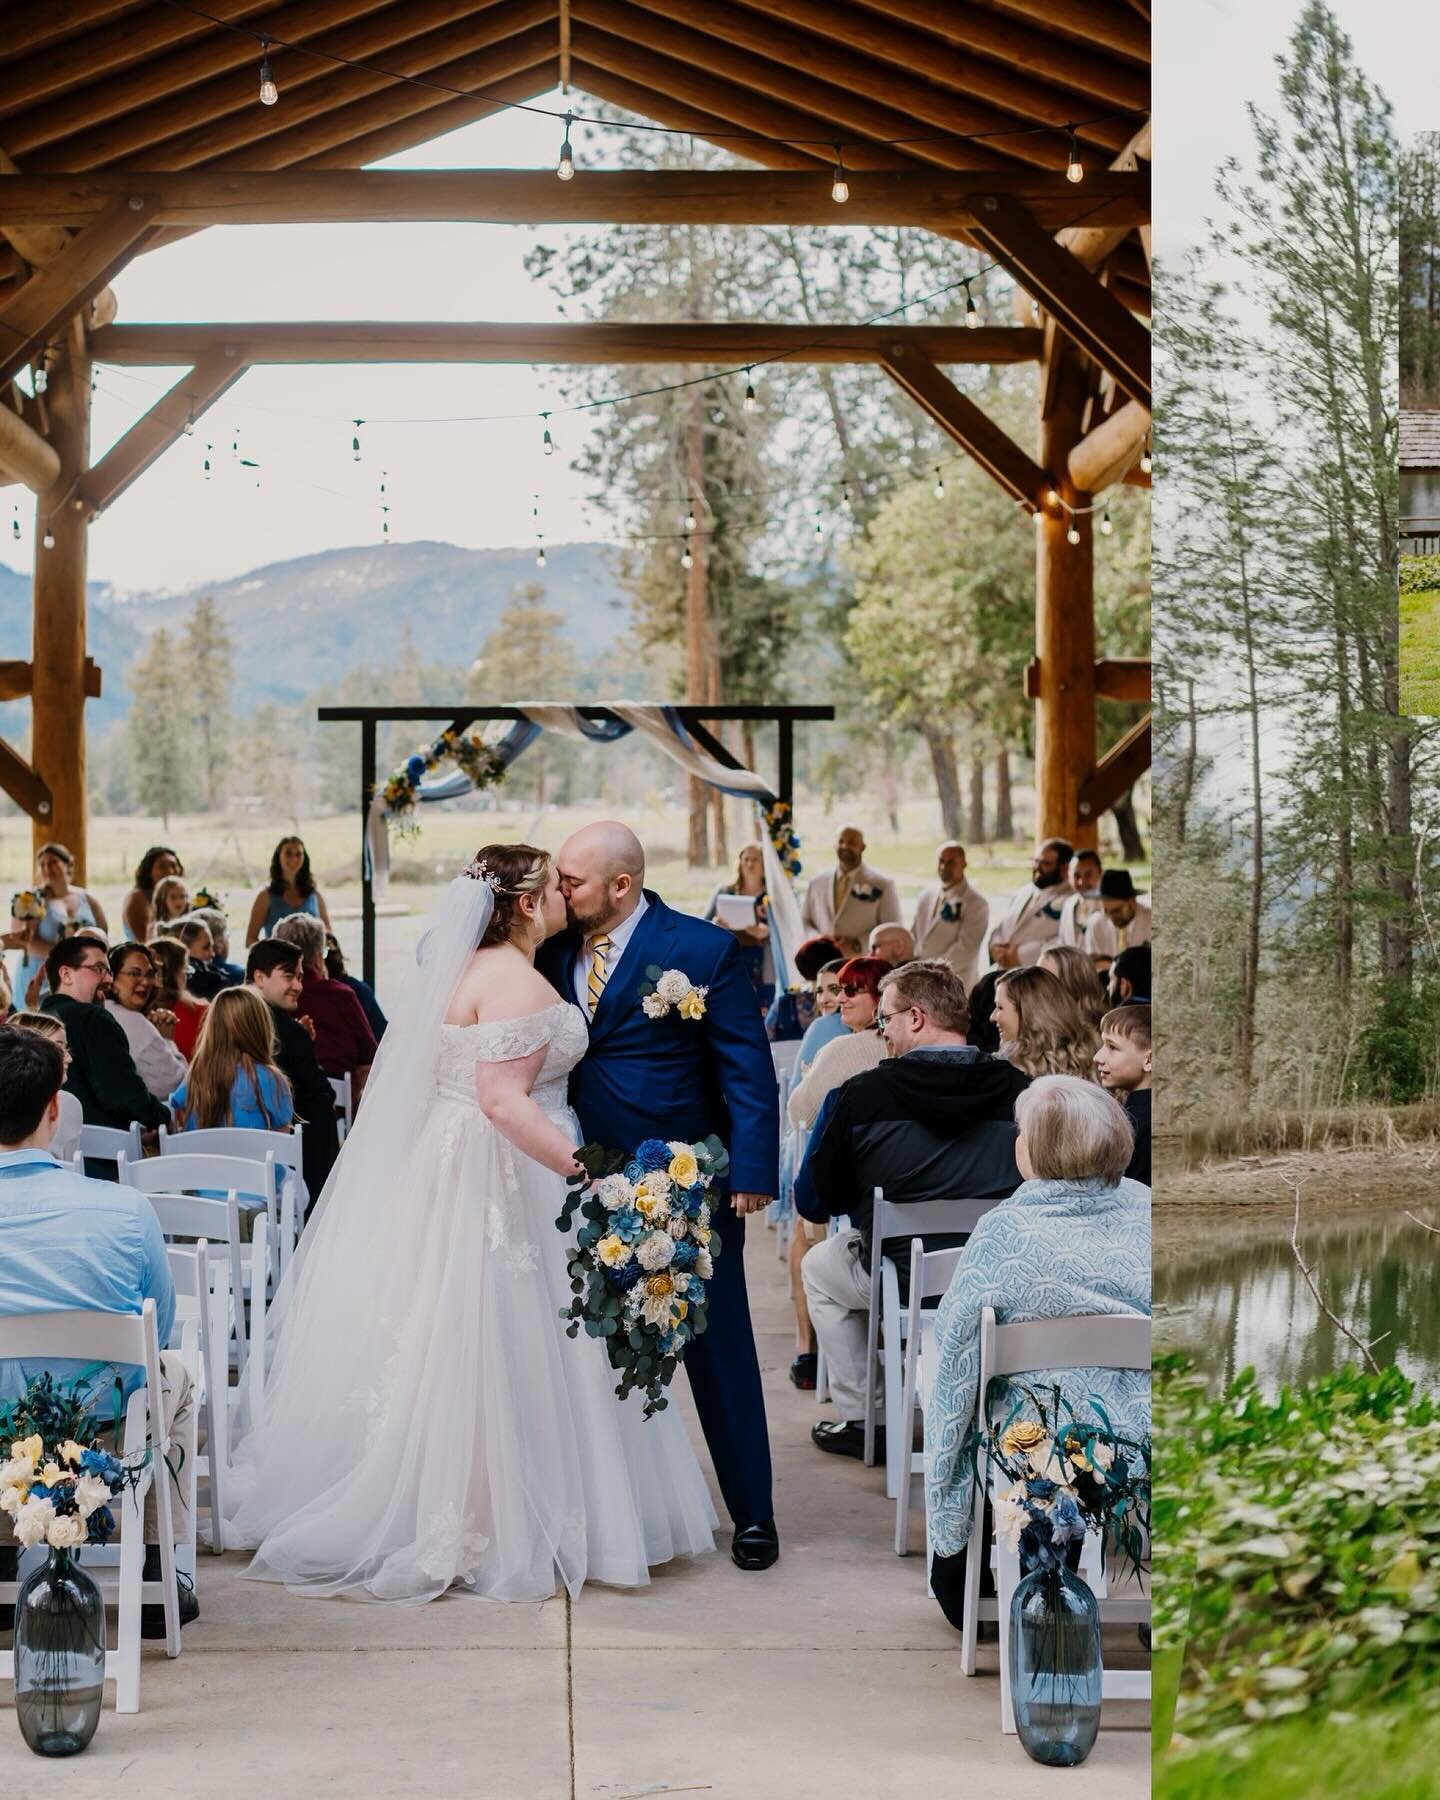 🌲✨ Capturing Love in the Heart of Nature! 📸💍

Just wrapped up an absolutely magical mountain woodsy wedding in Southern Oregon, and let me tell you, the scenery did not disappoint! From towering pines to babbling brooks, every moment felt like som